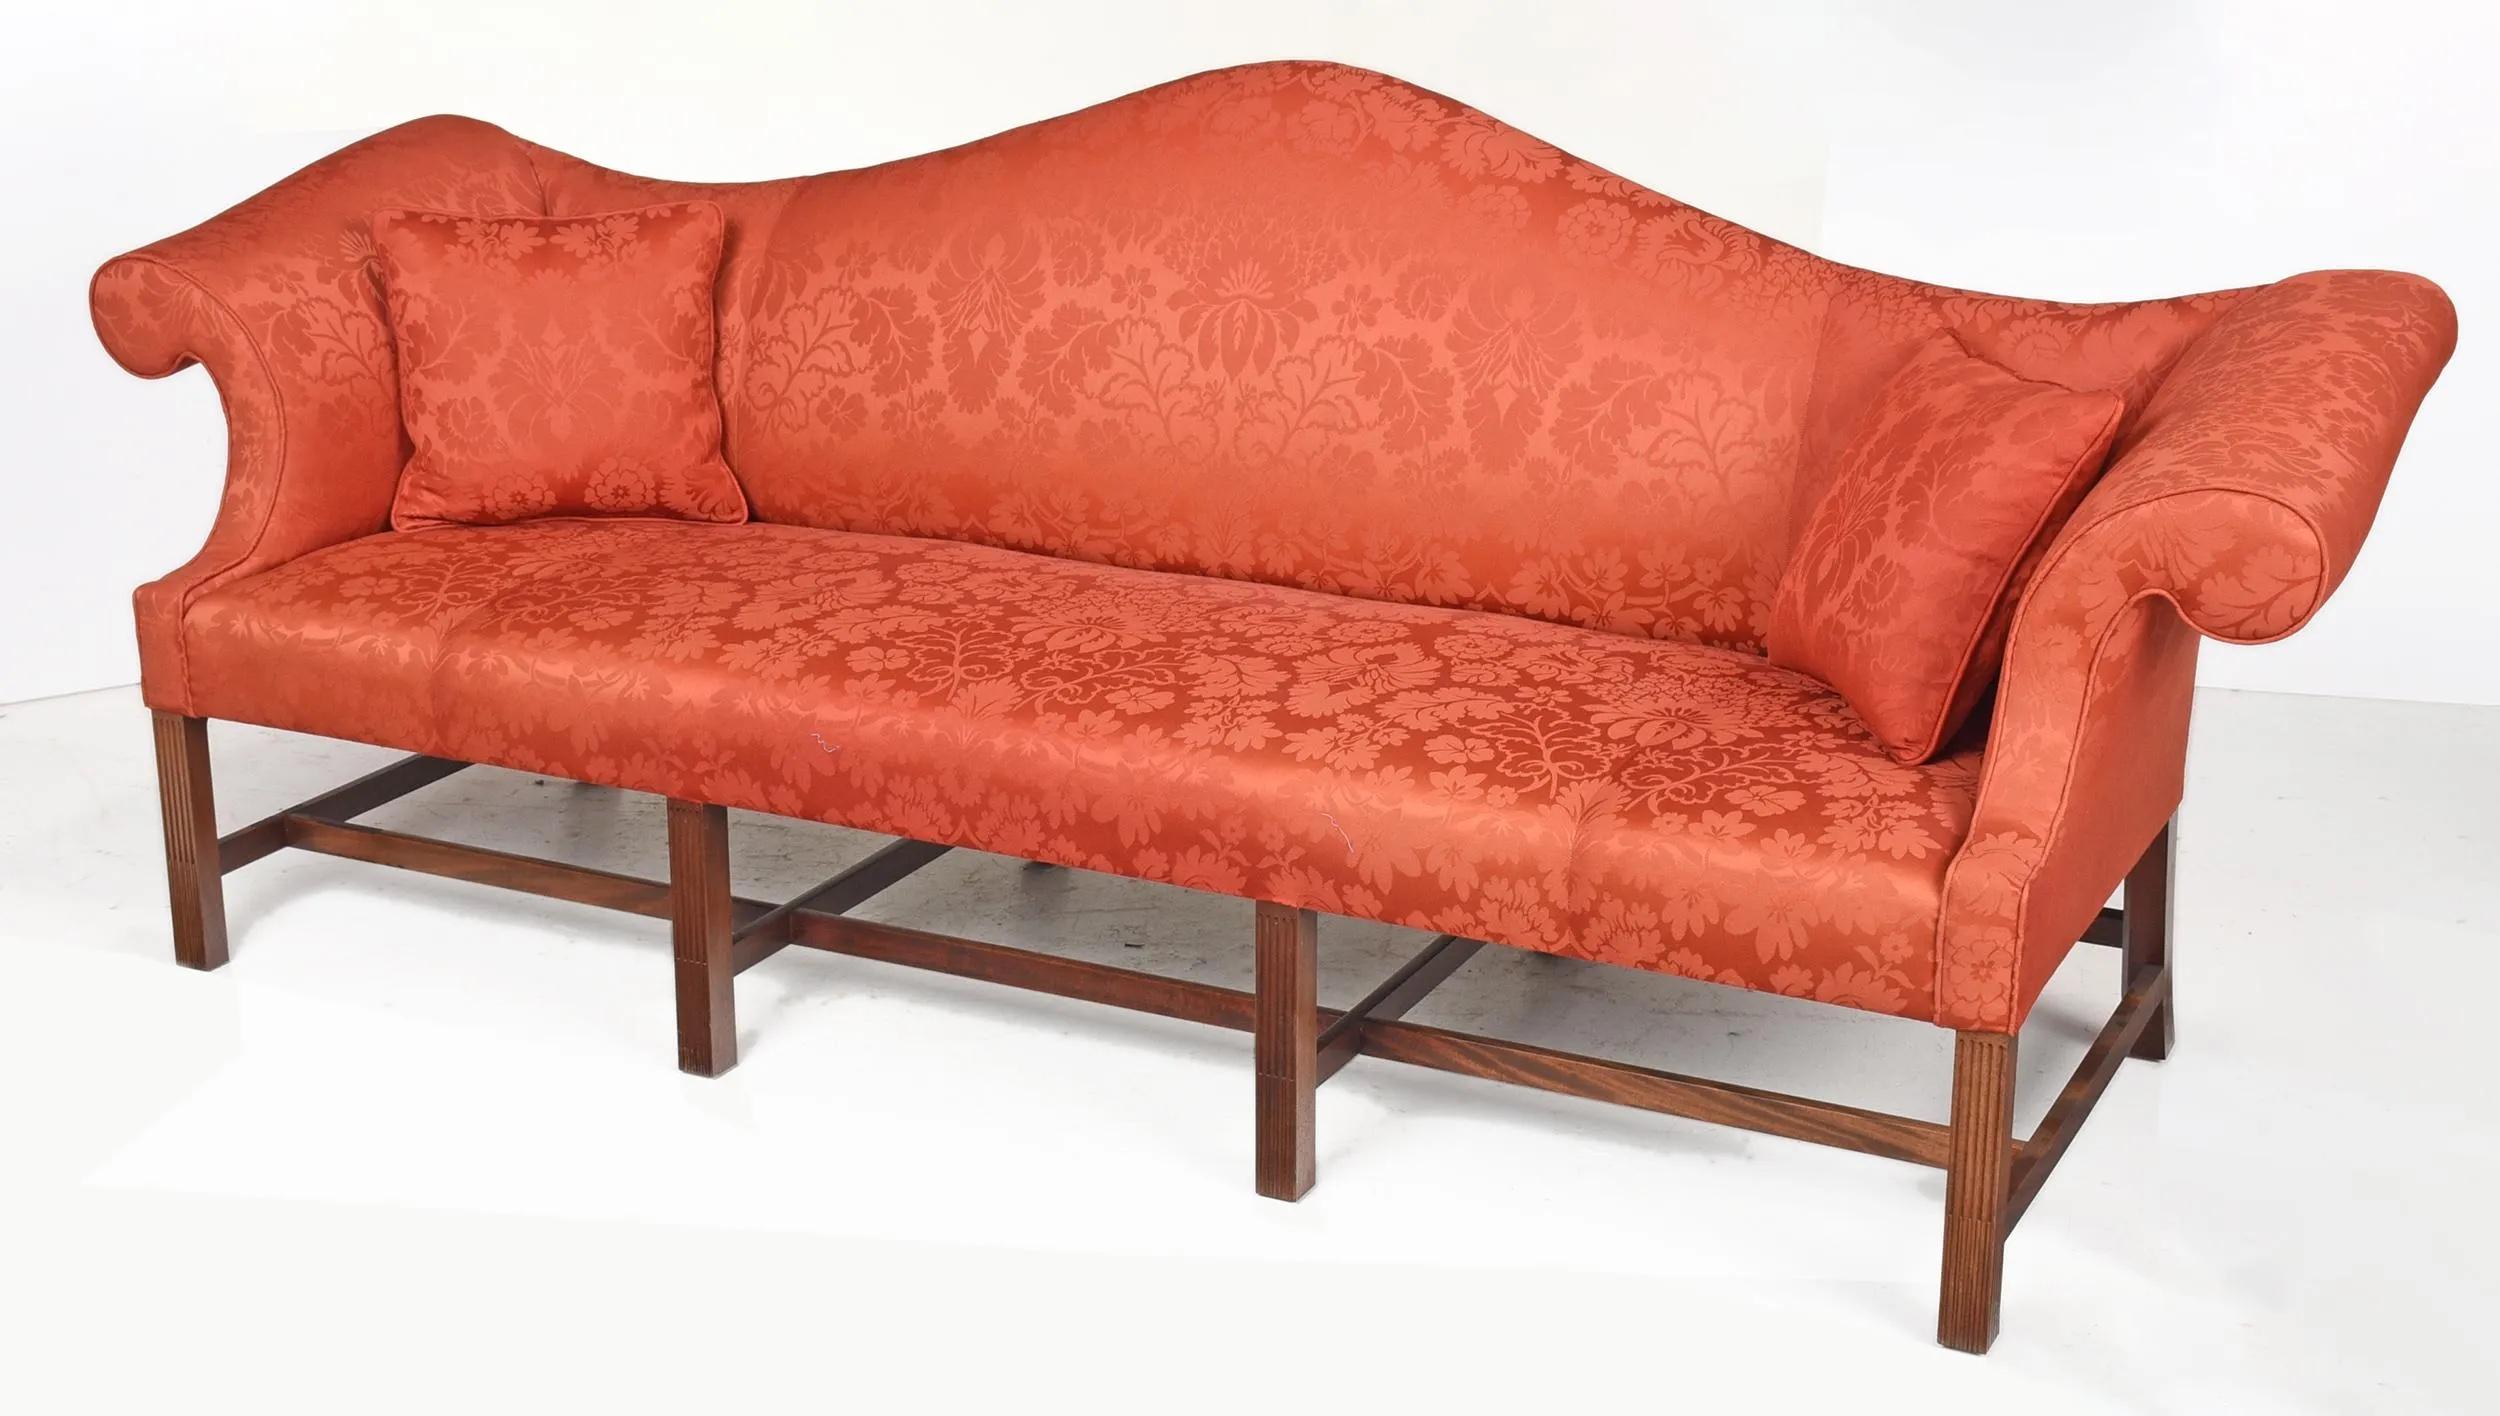 Pair of custom American chippendale mahogany sofas made by Roger Gonzales, Kent, Connecticut, circa 1992, reproducing the sofas at the John Brown House in Newport, Rhode Island, each with stop fluted square mahogany legs with stretchers, frames